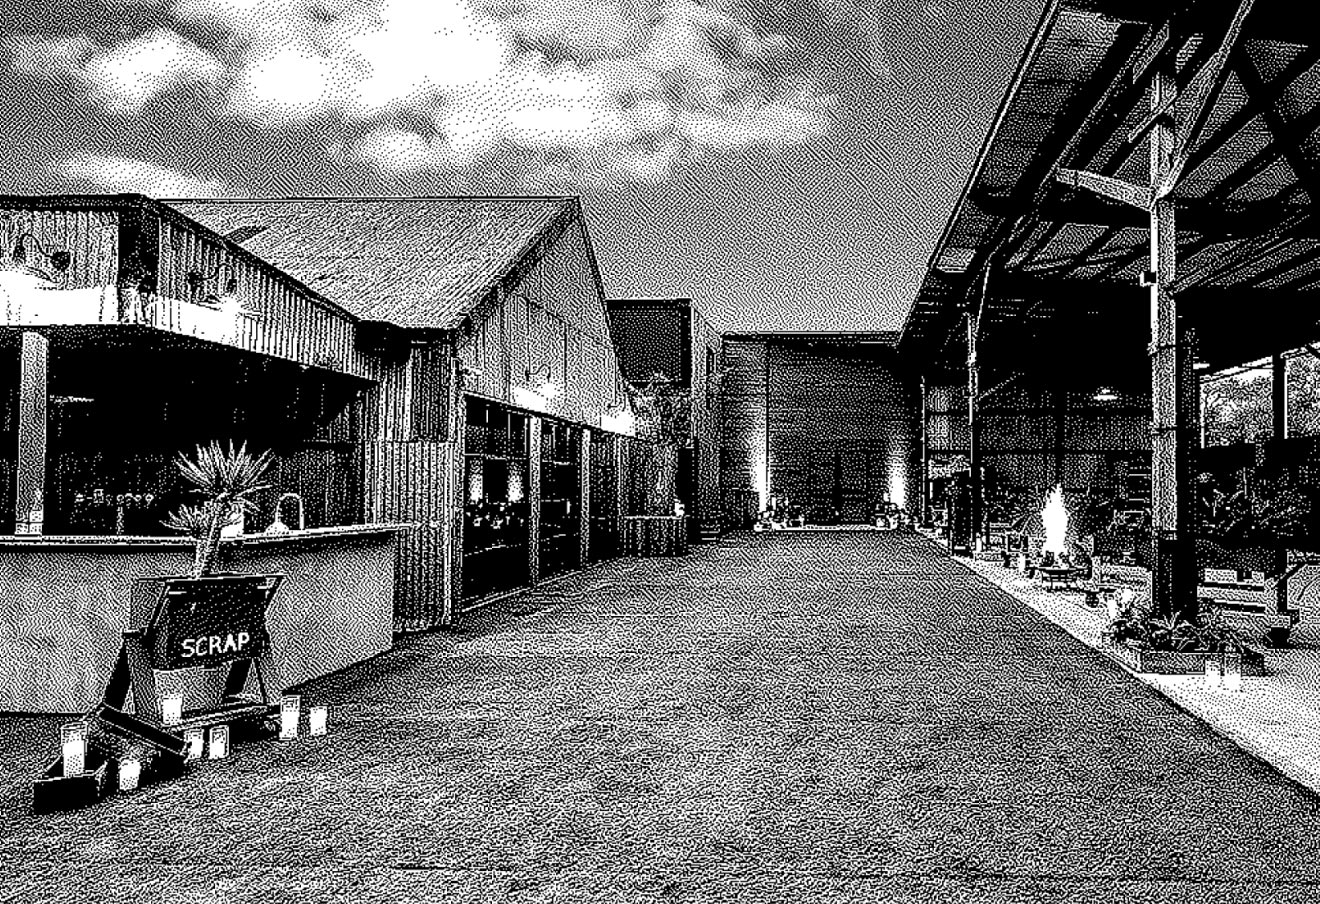 A stylized view of the Timber Yard